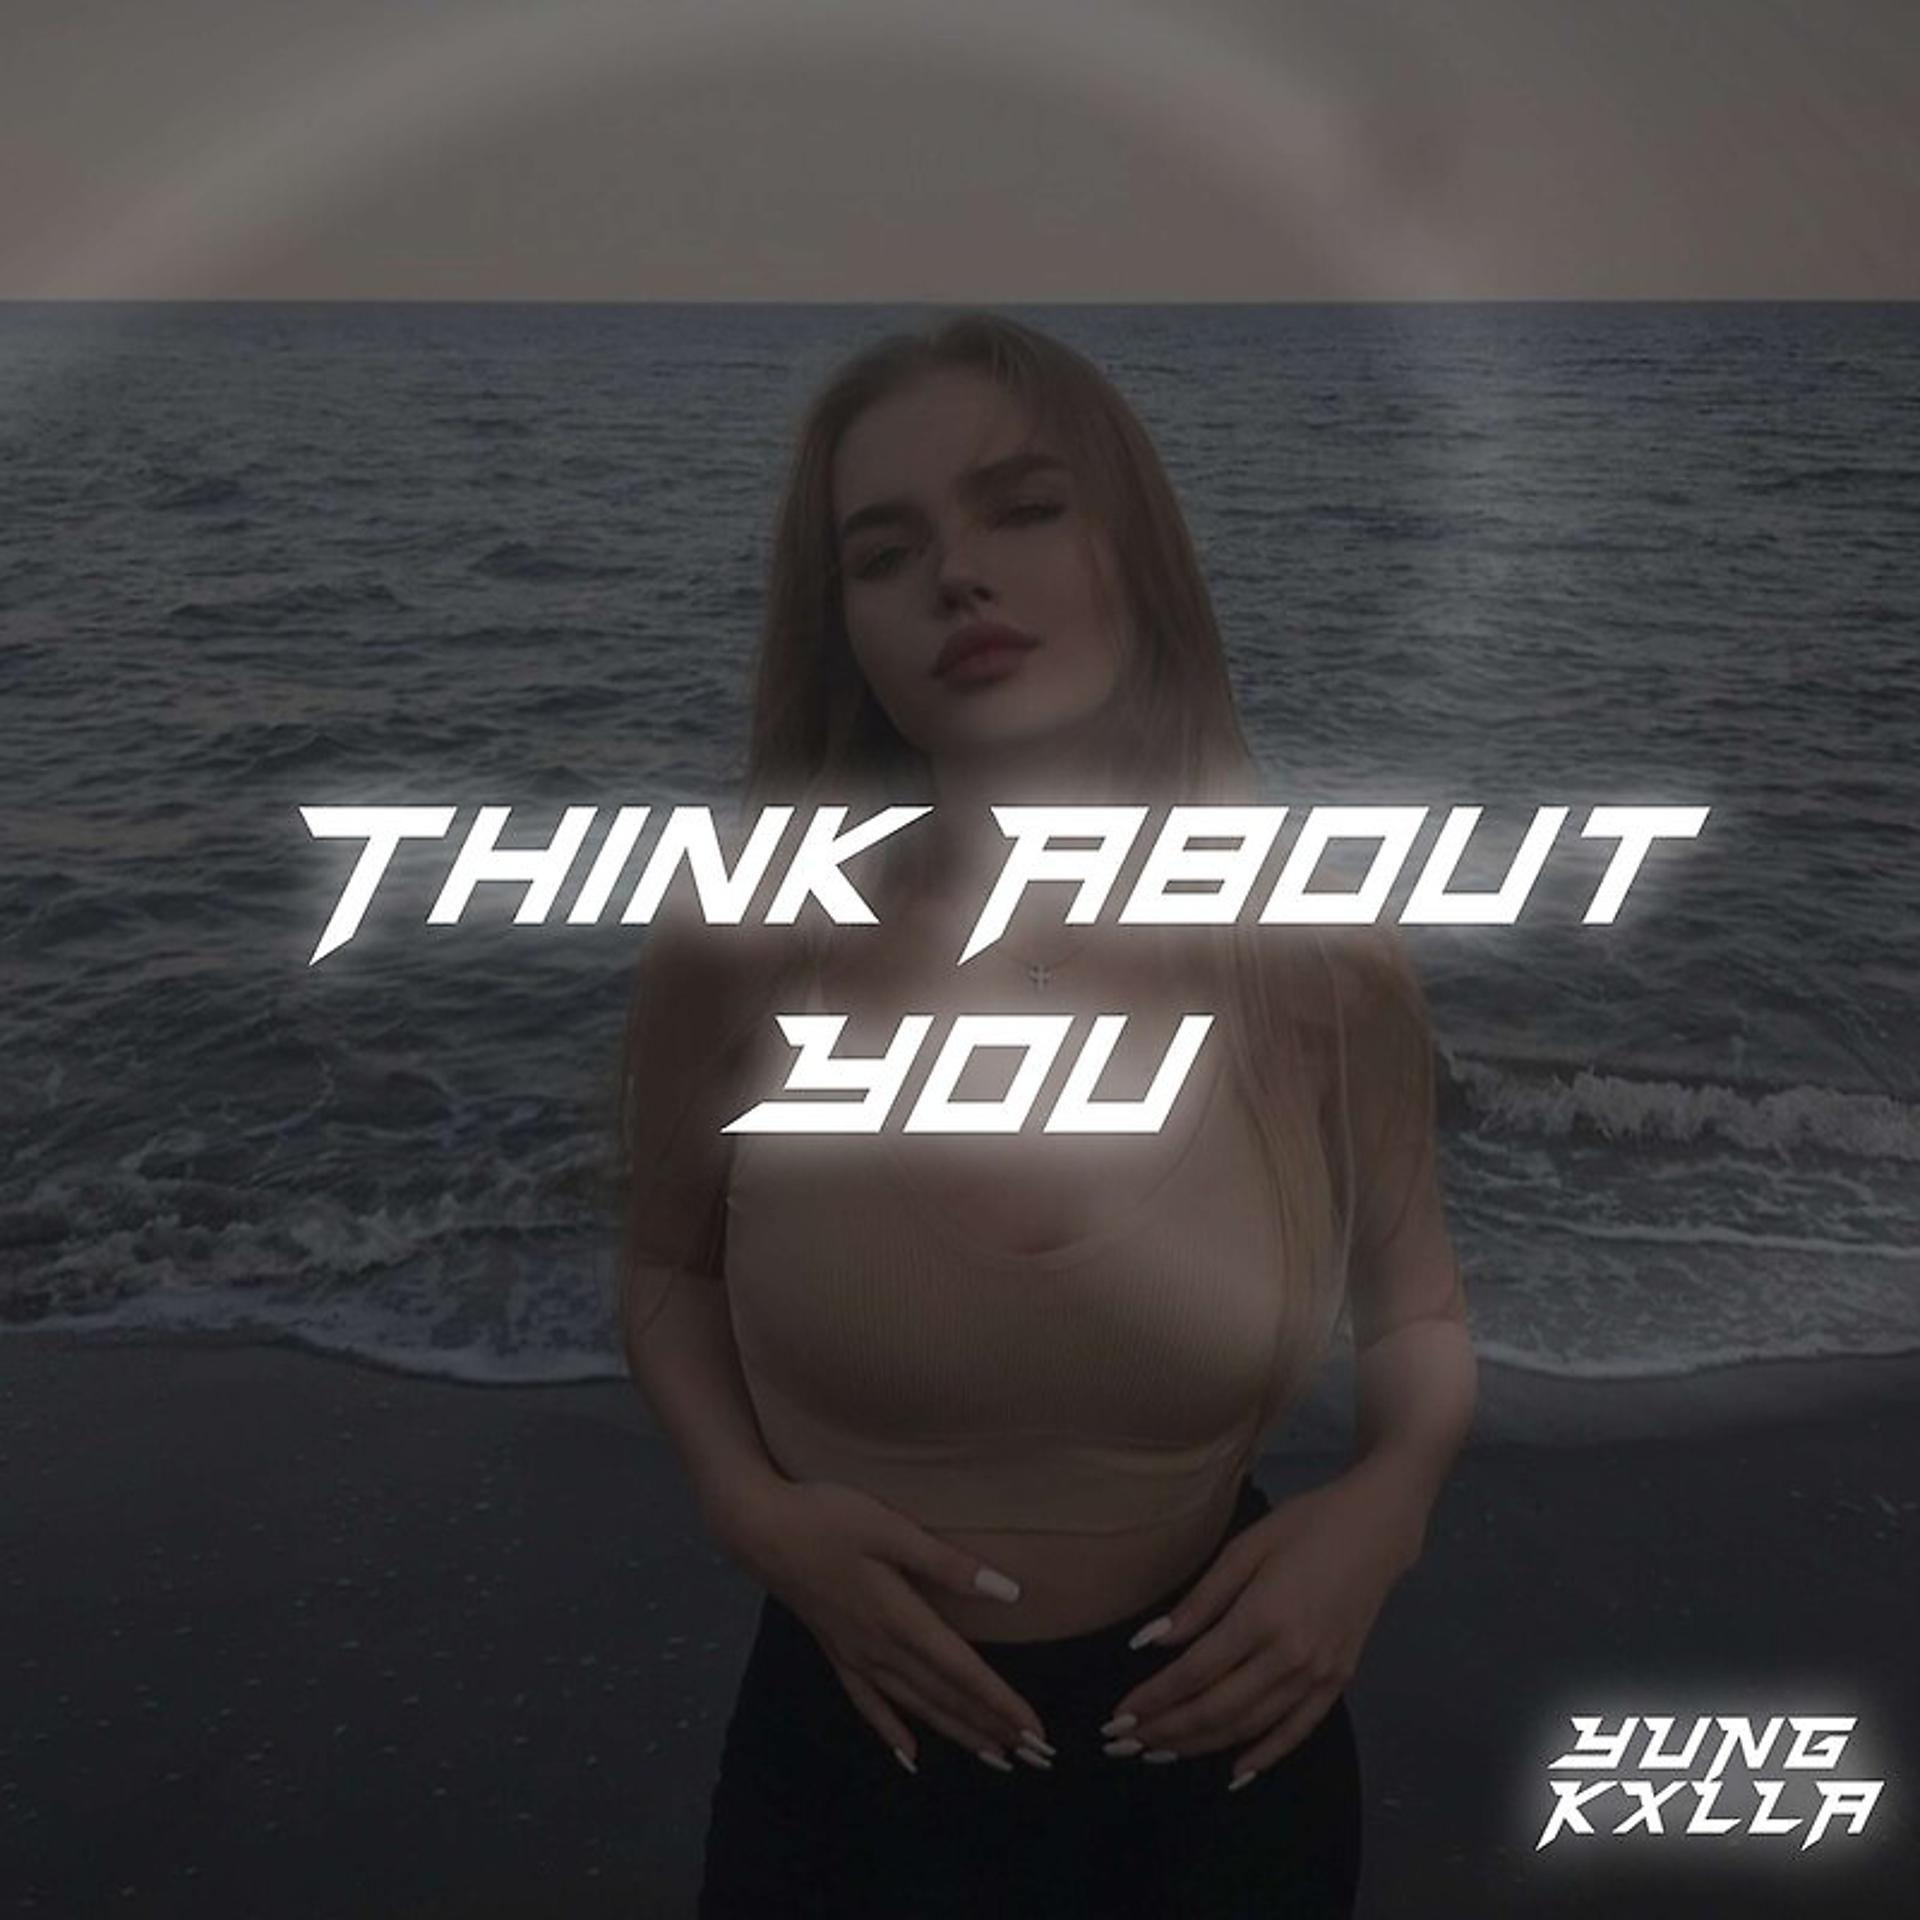 Постер альбома Think About You